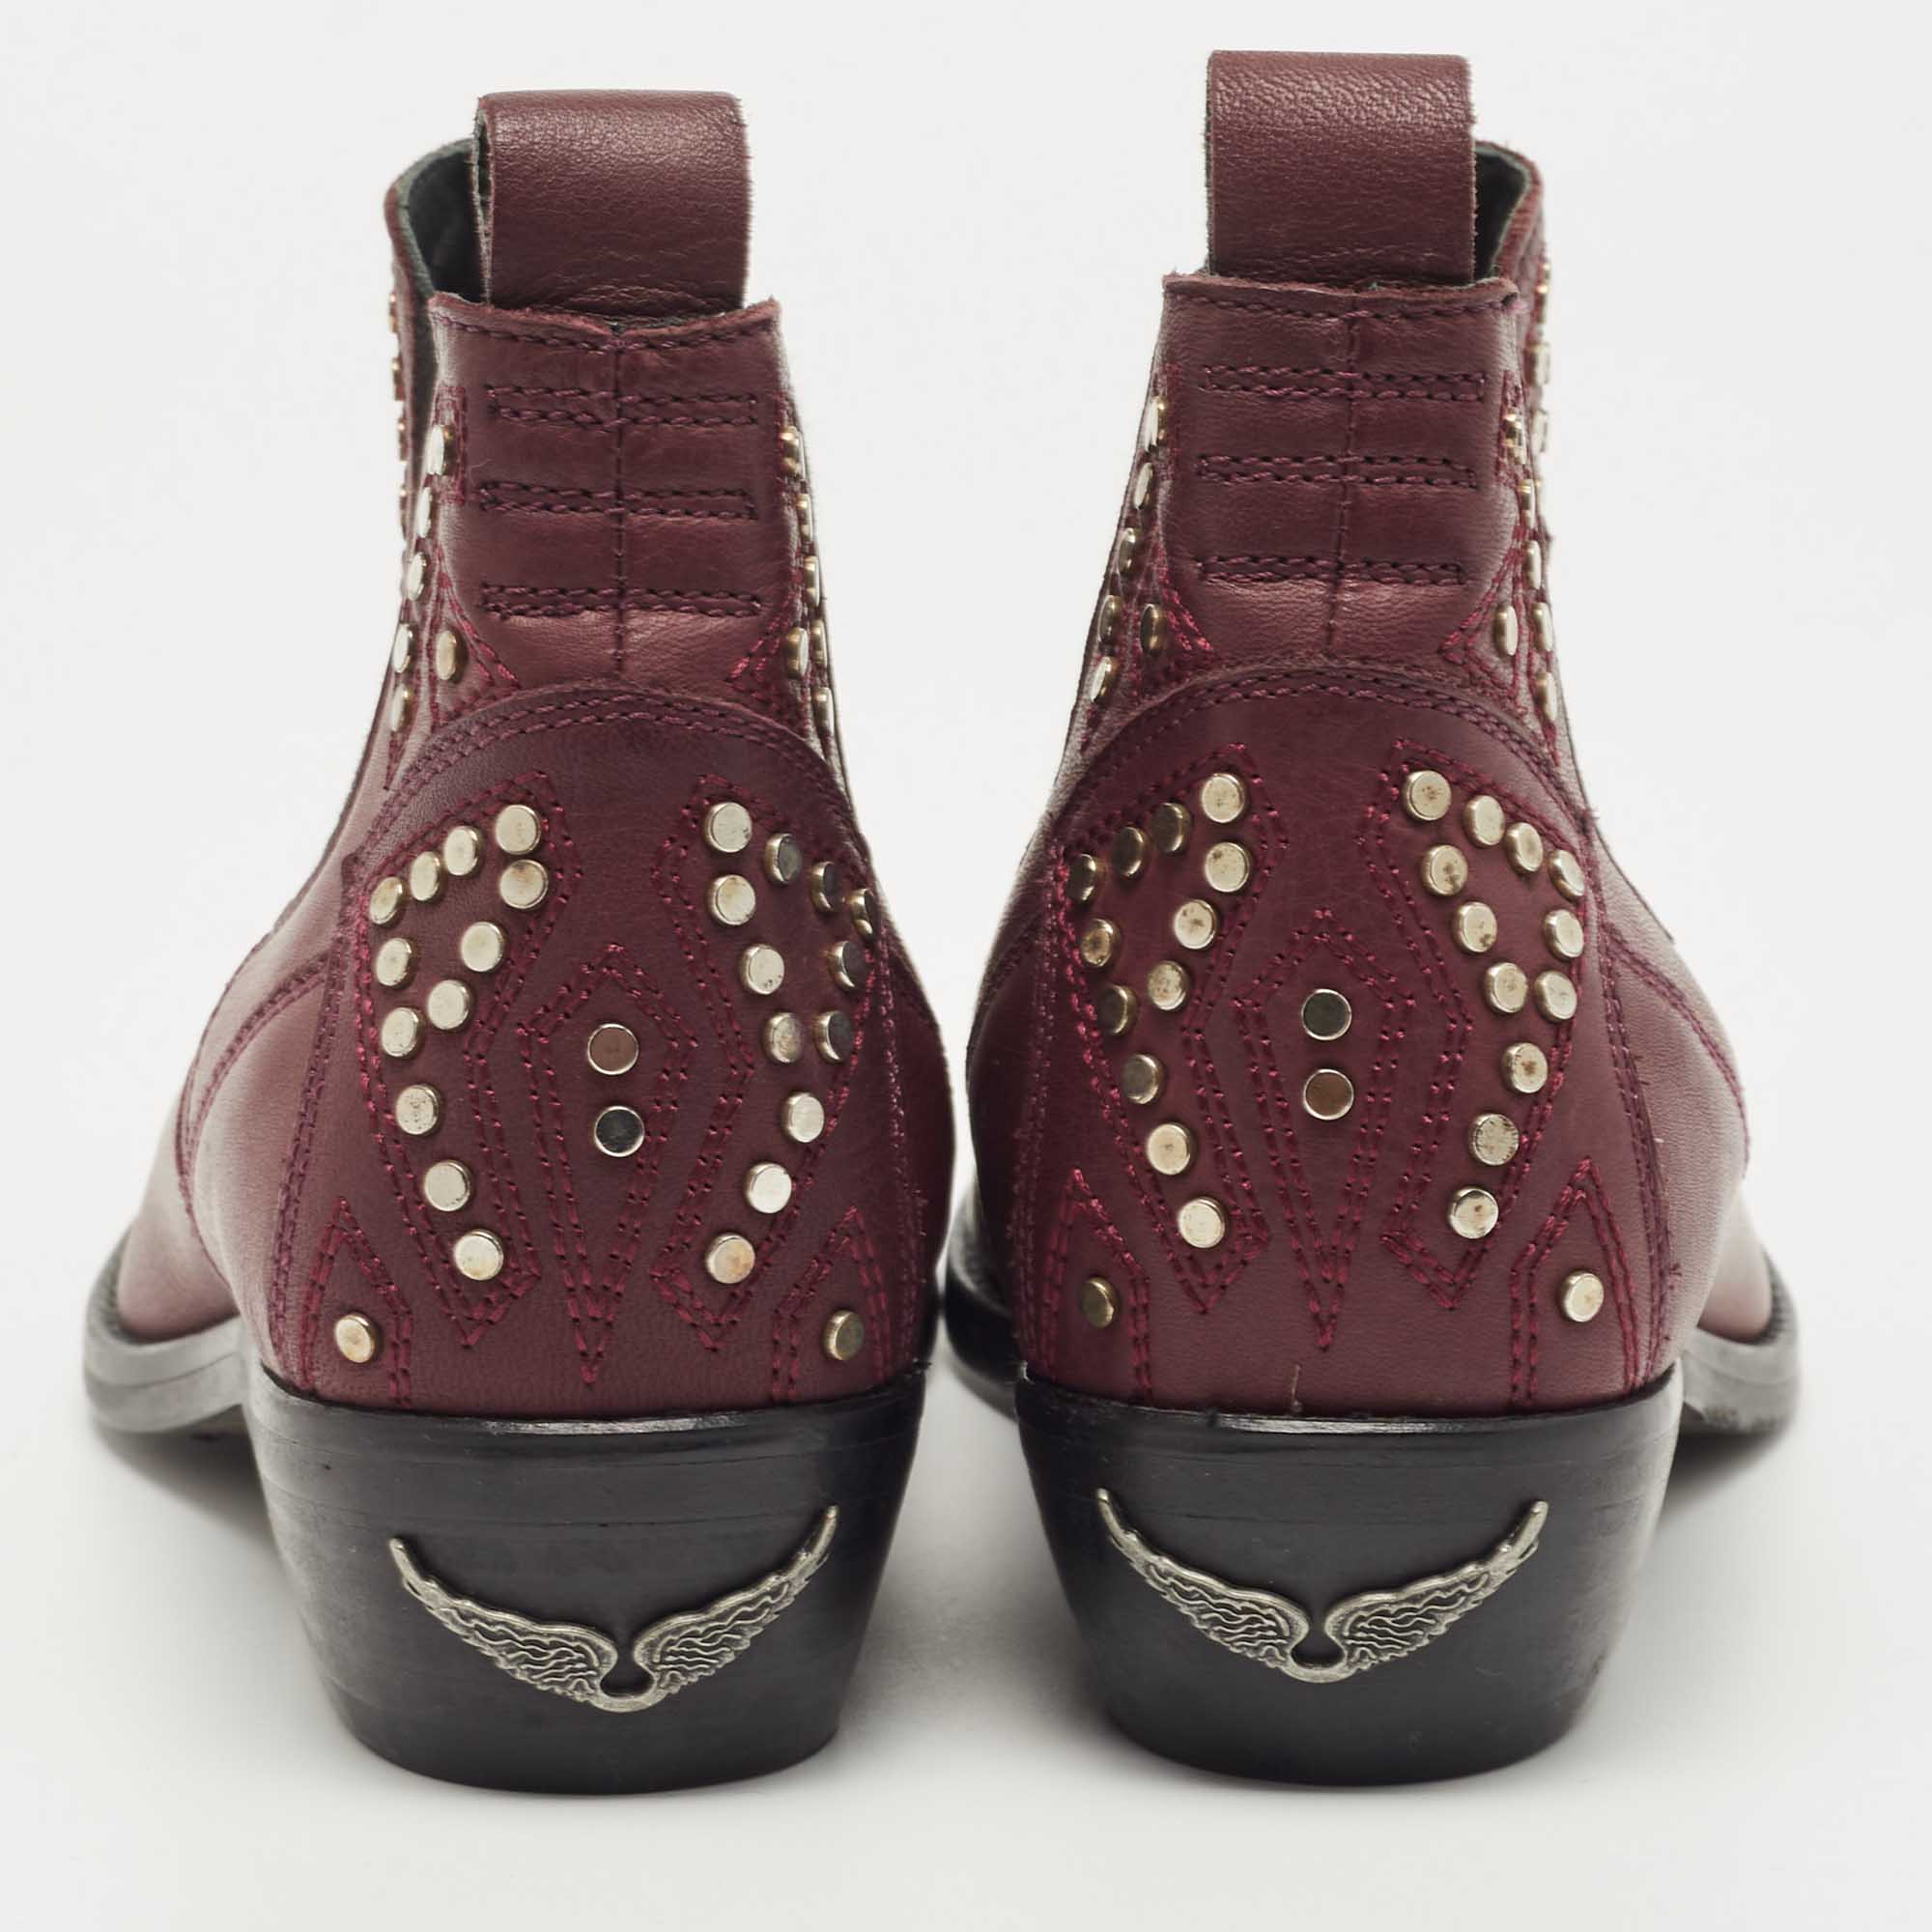 Zadig & Voltaire Burgundy Leather Thylana Studded Ankle Booties Size 36